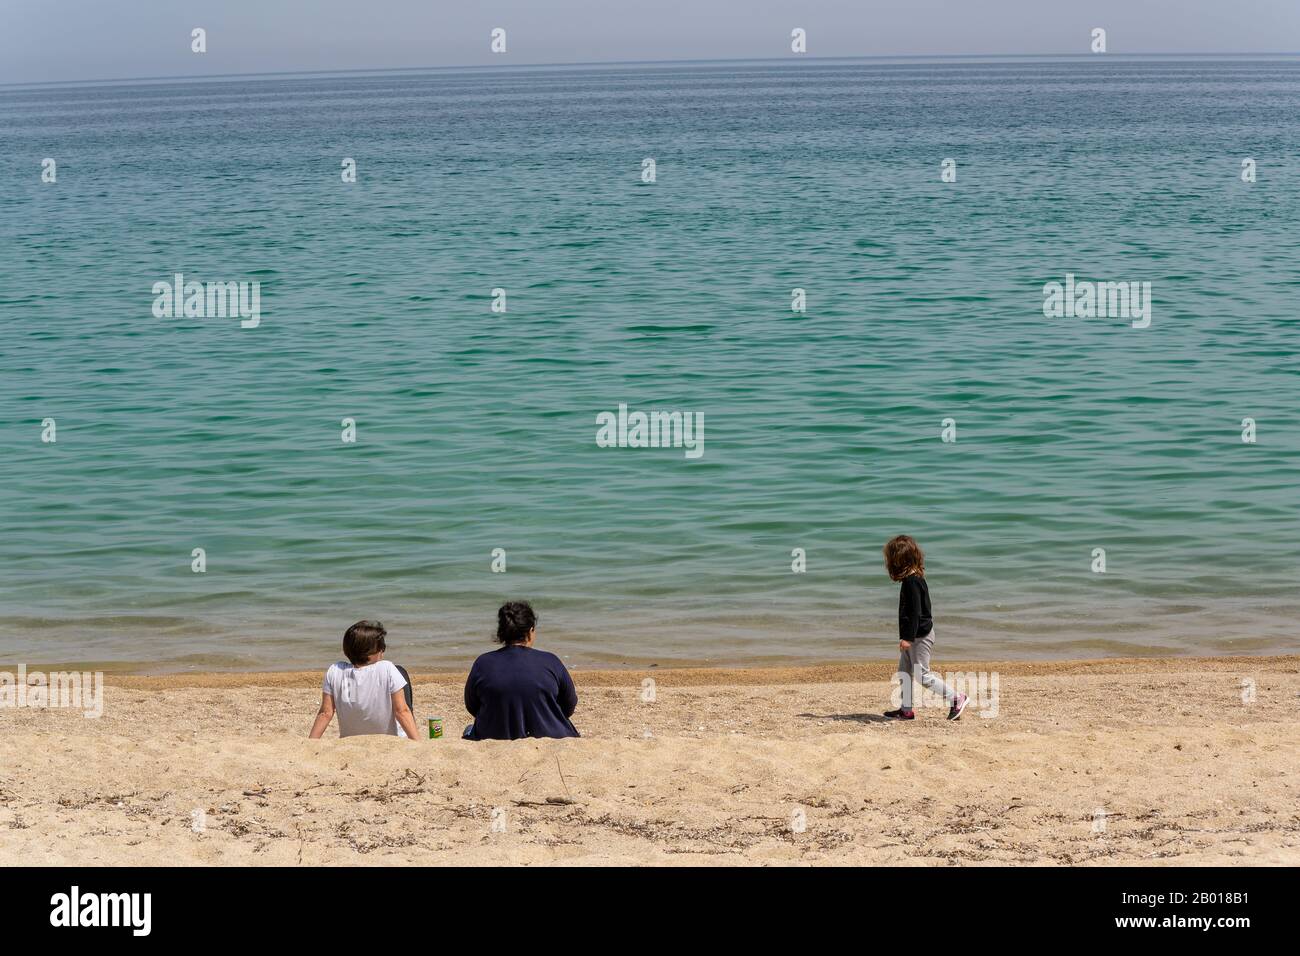 Lerissos, Greece - April 27, 2019: Three people, two children and woman at the beach of Lerissos sitting and walking at the beach with the Mediterrane Stock Photo